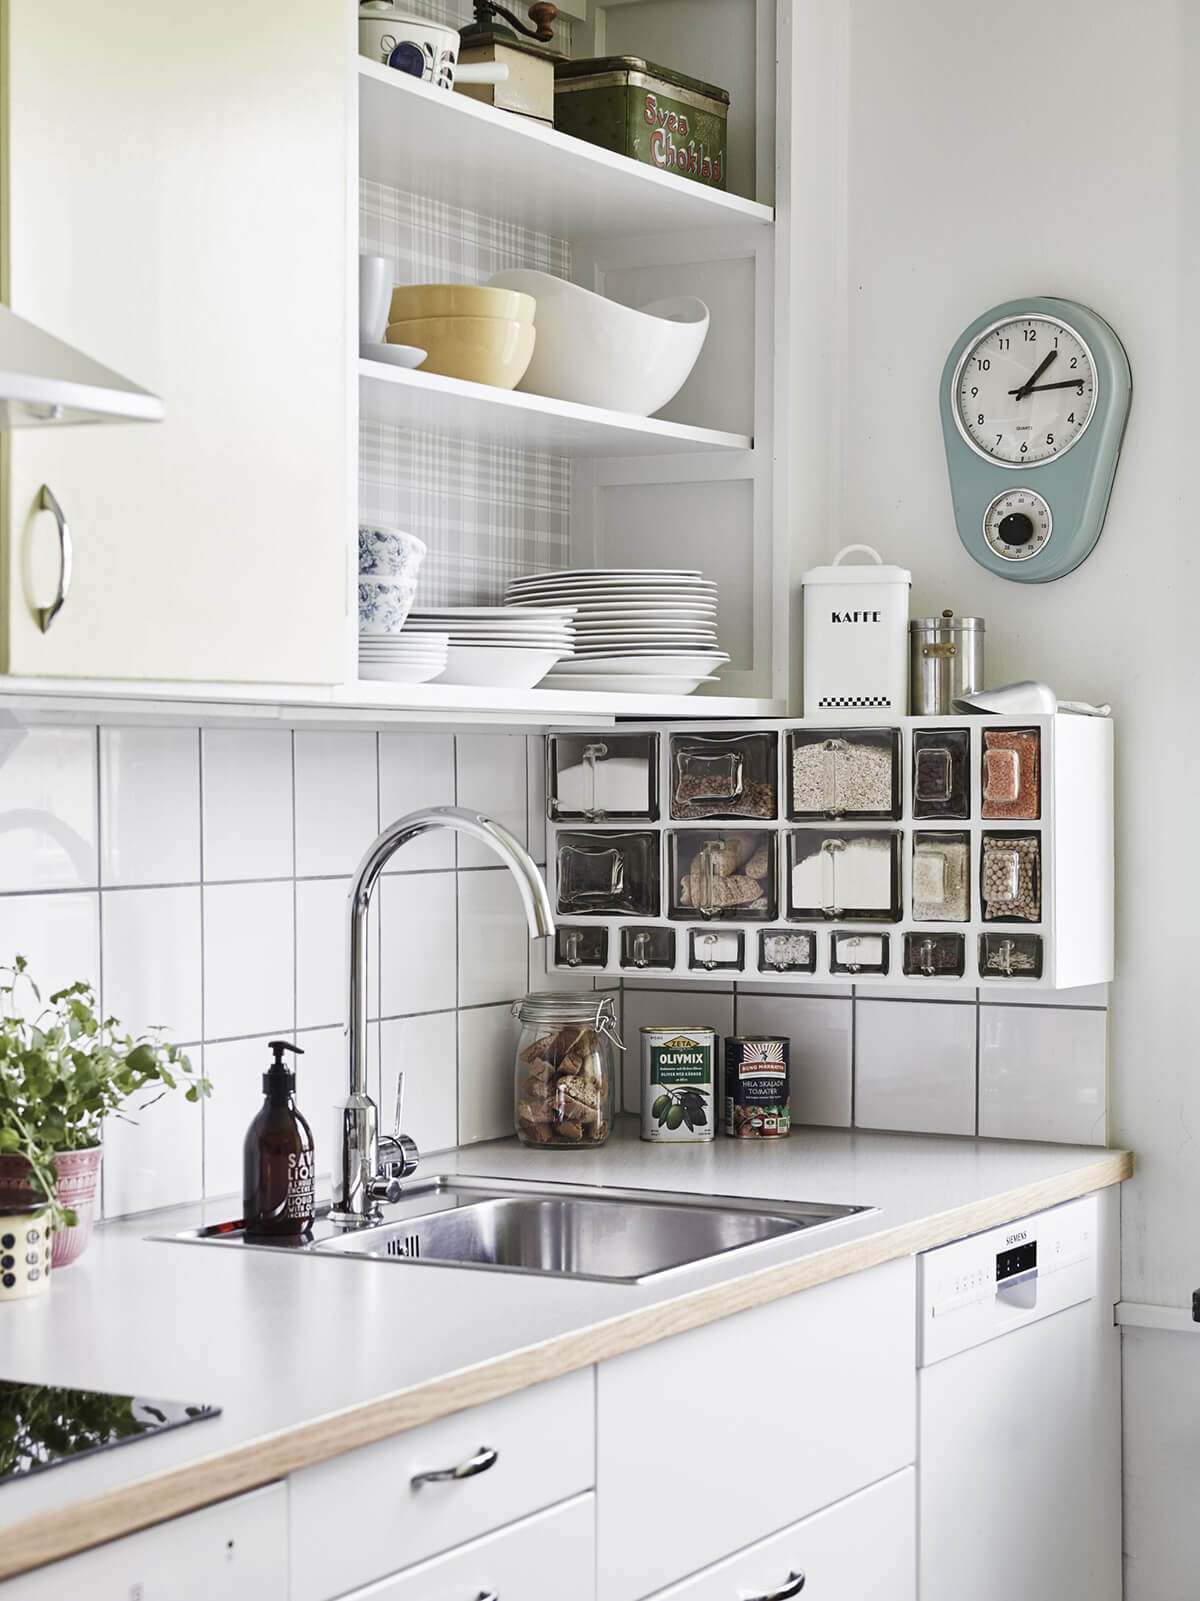 white kitchen with open shelving hanging storage boxes wall clock stainless steel sink